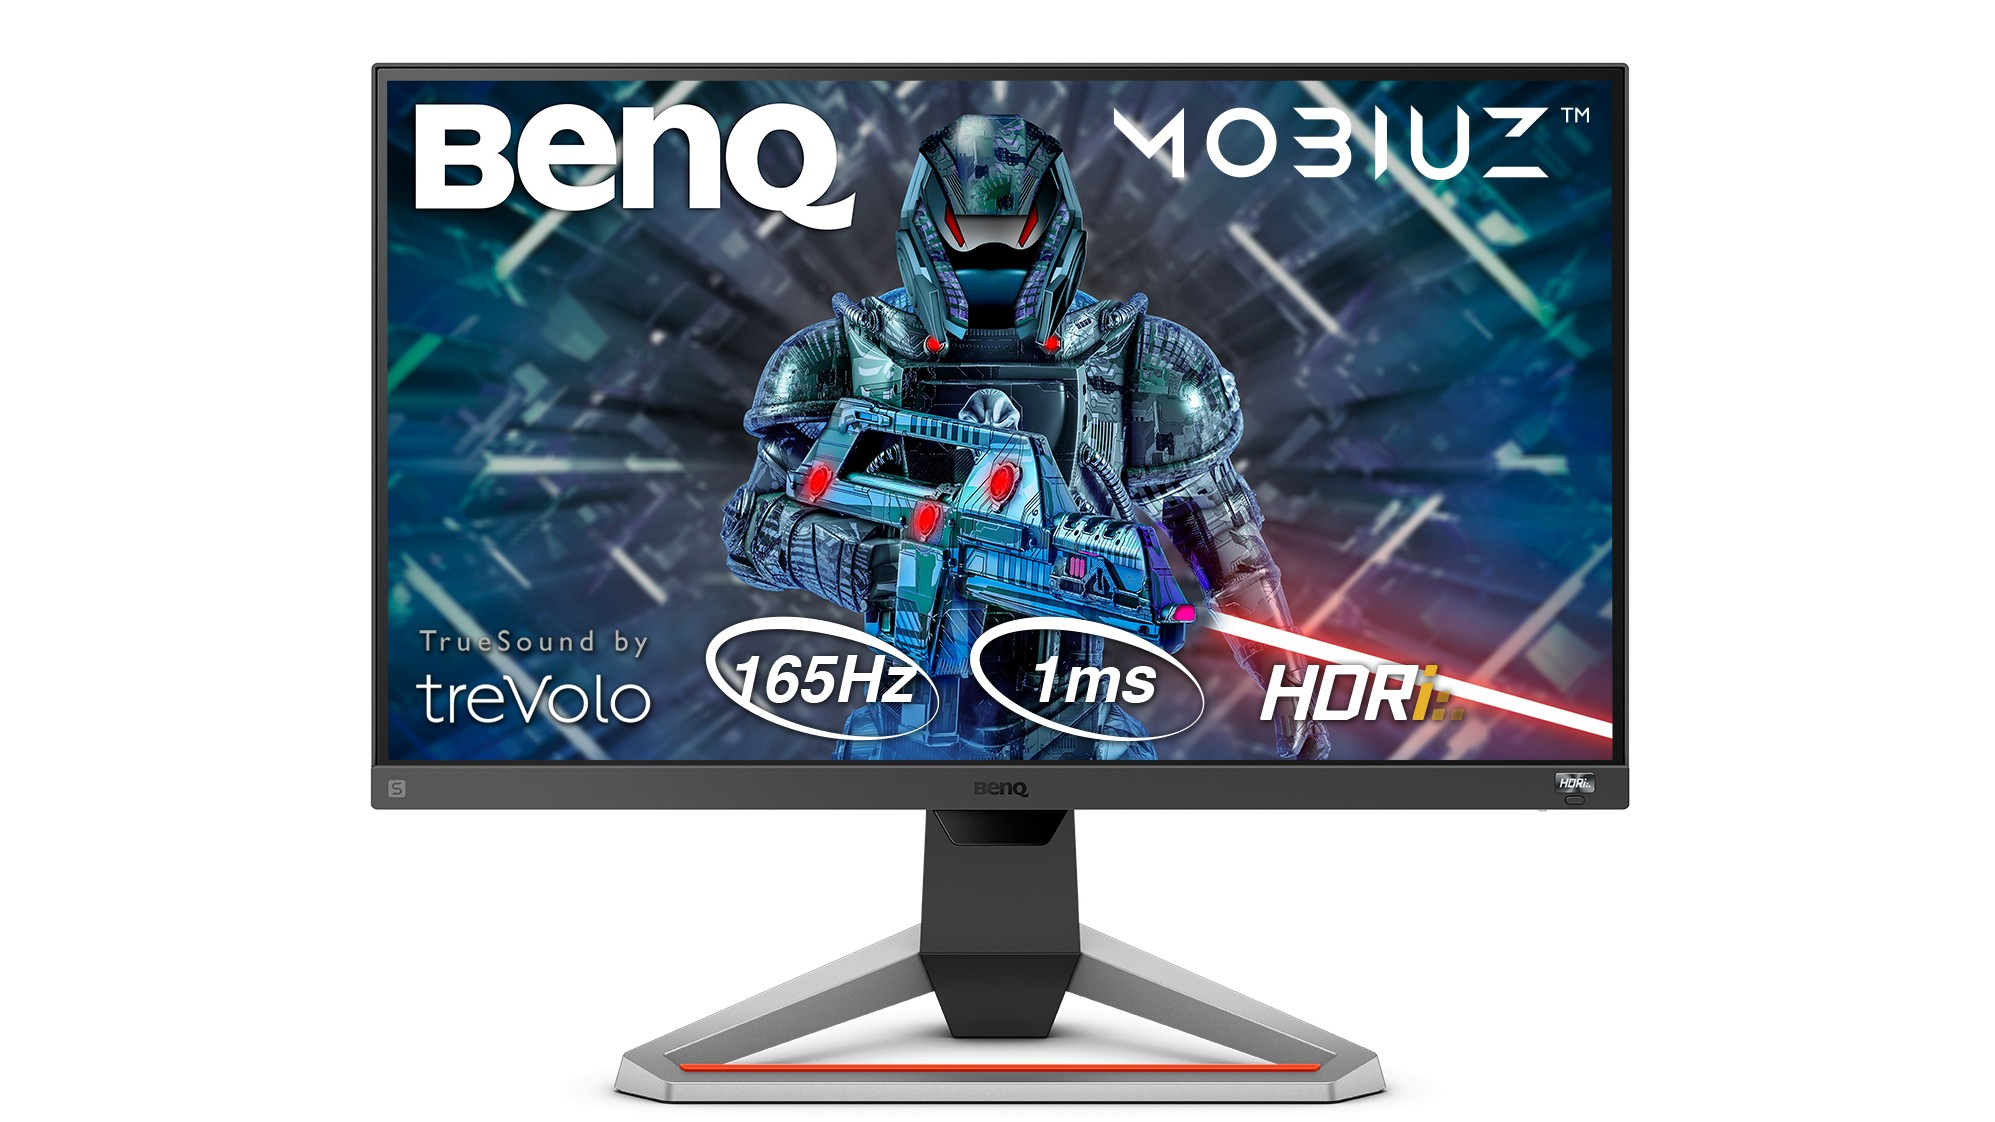 BenQ introduces two new gaming monitors